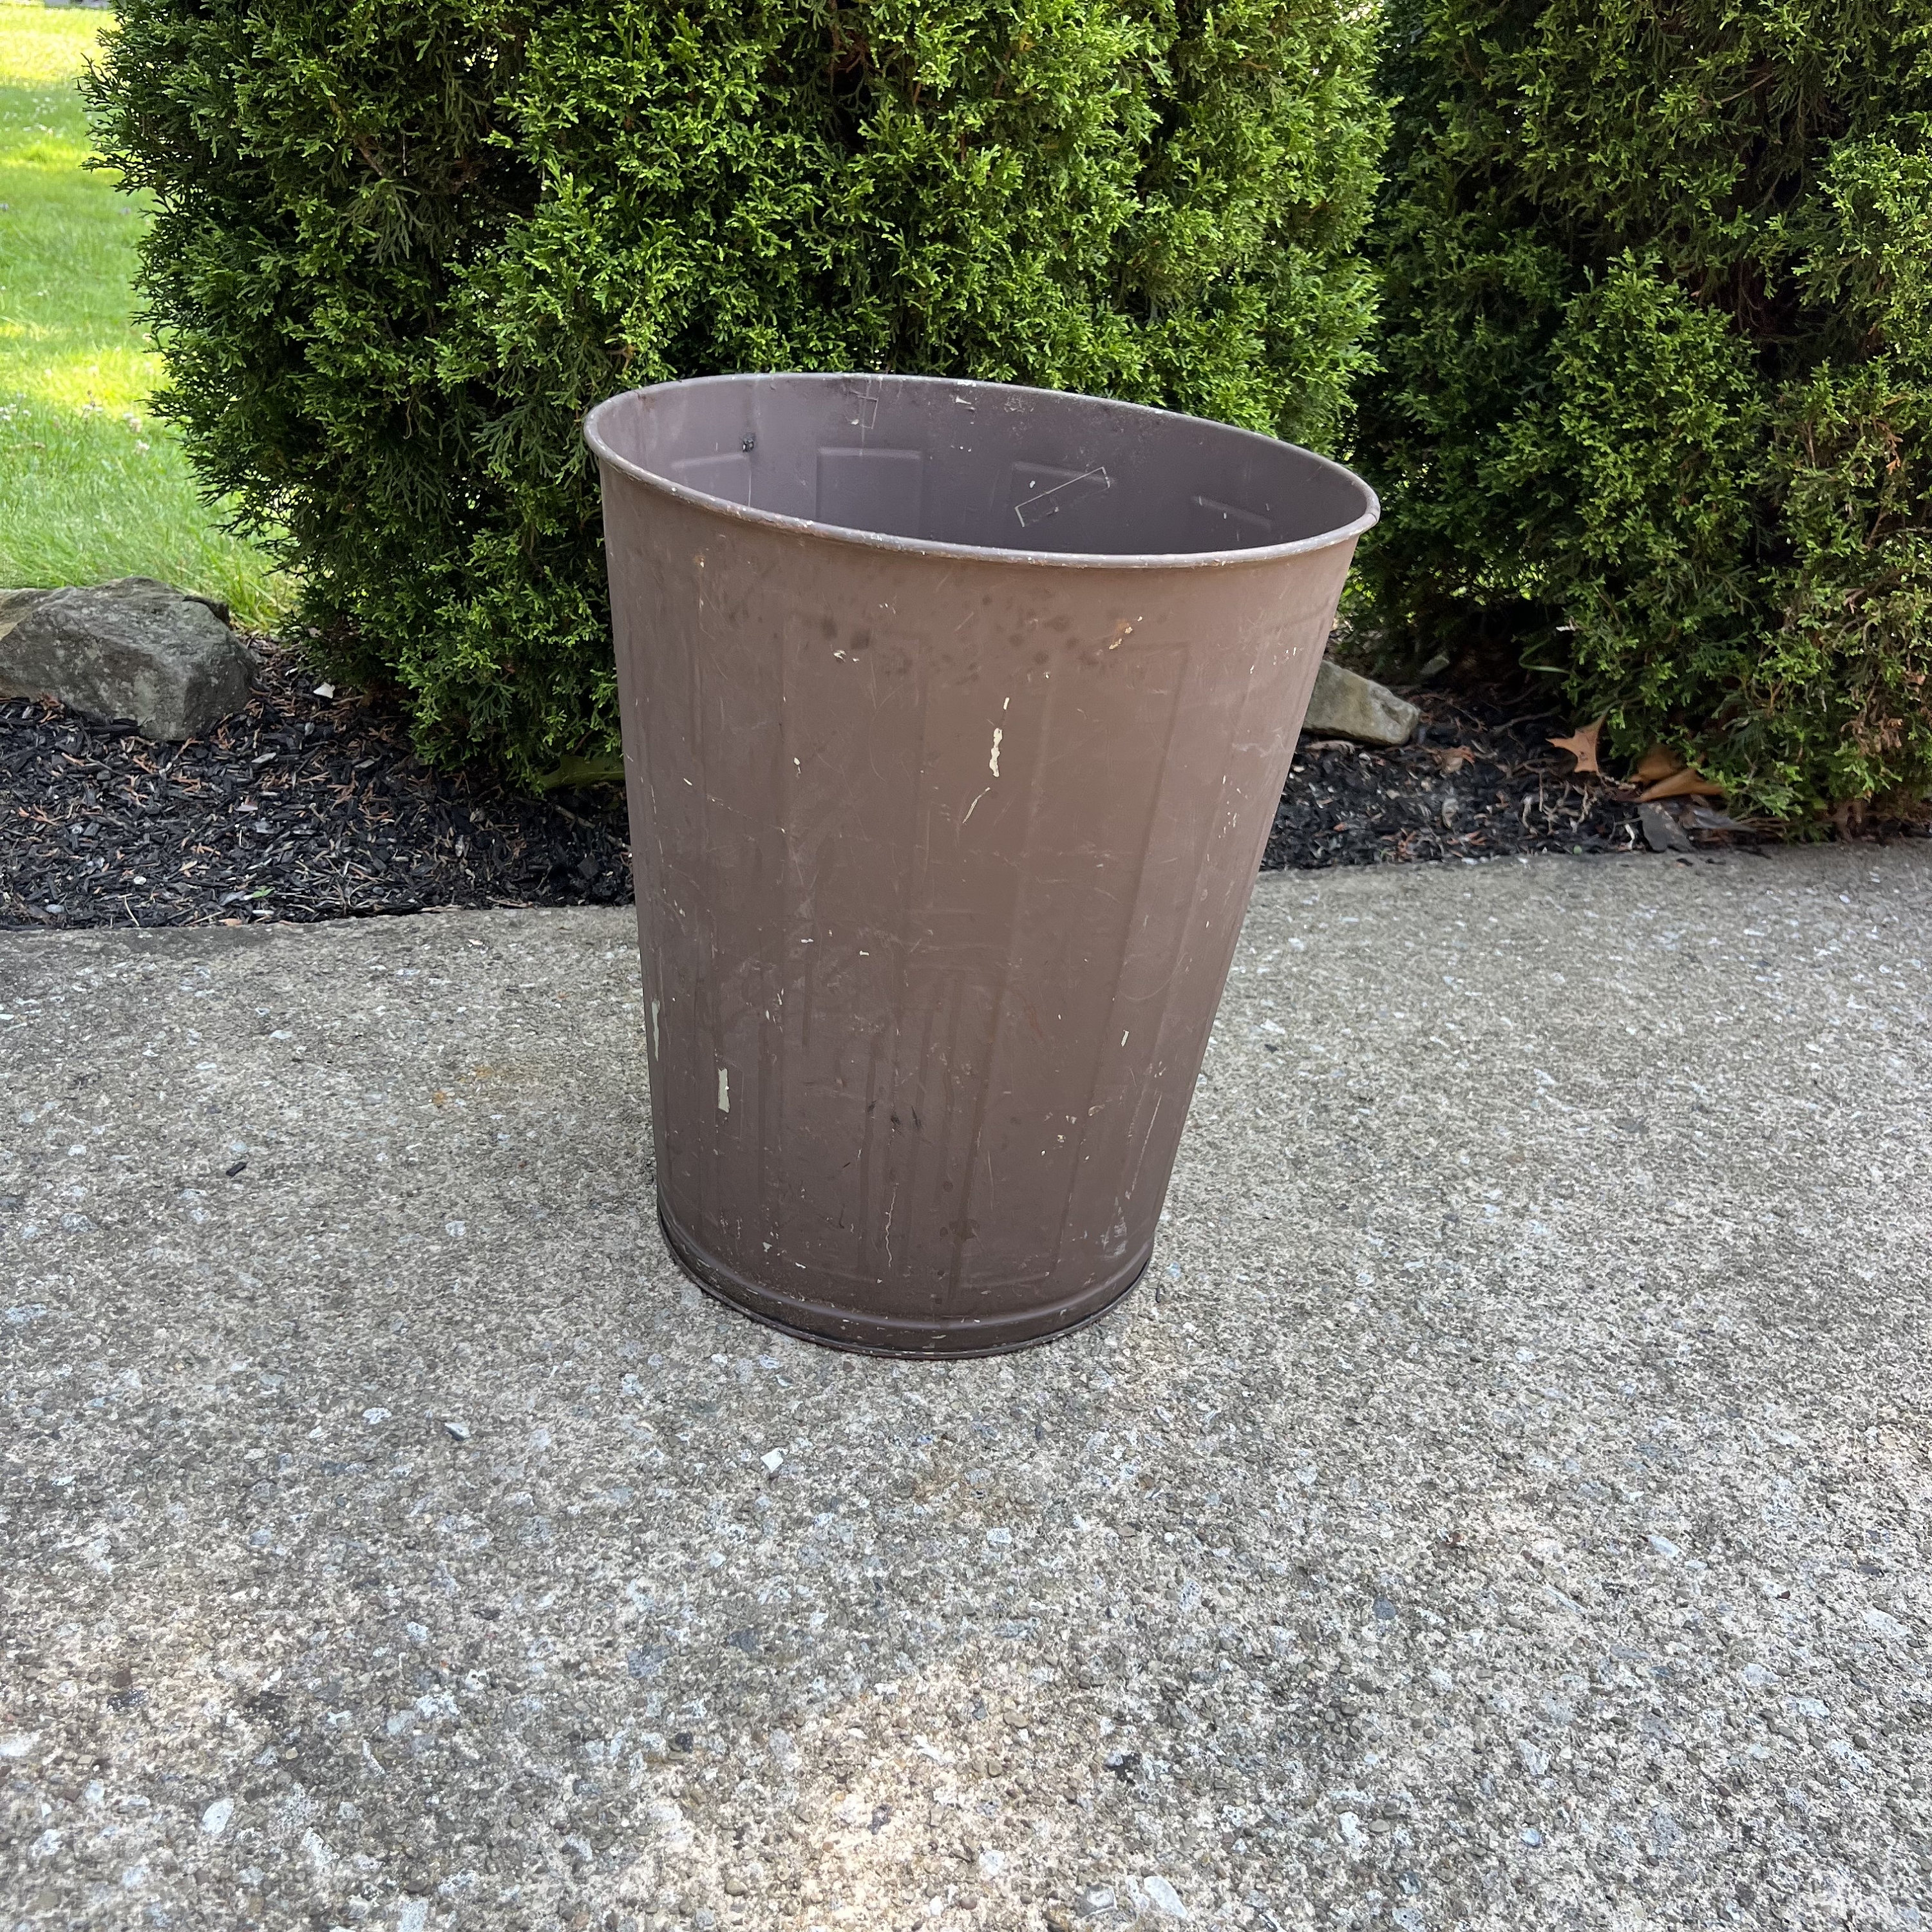 VINTAGE Trash Can WHEELING GALVANIZED METAL GARBAGE CAN WITH LID INDUSTRIAL